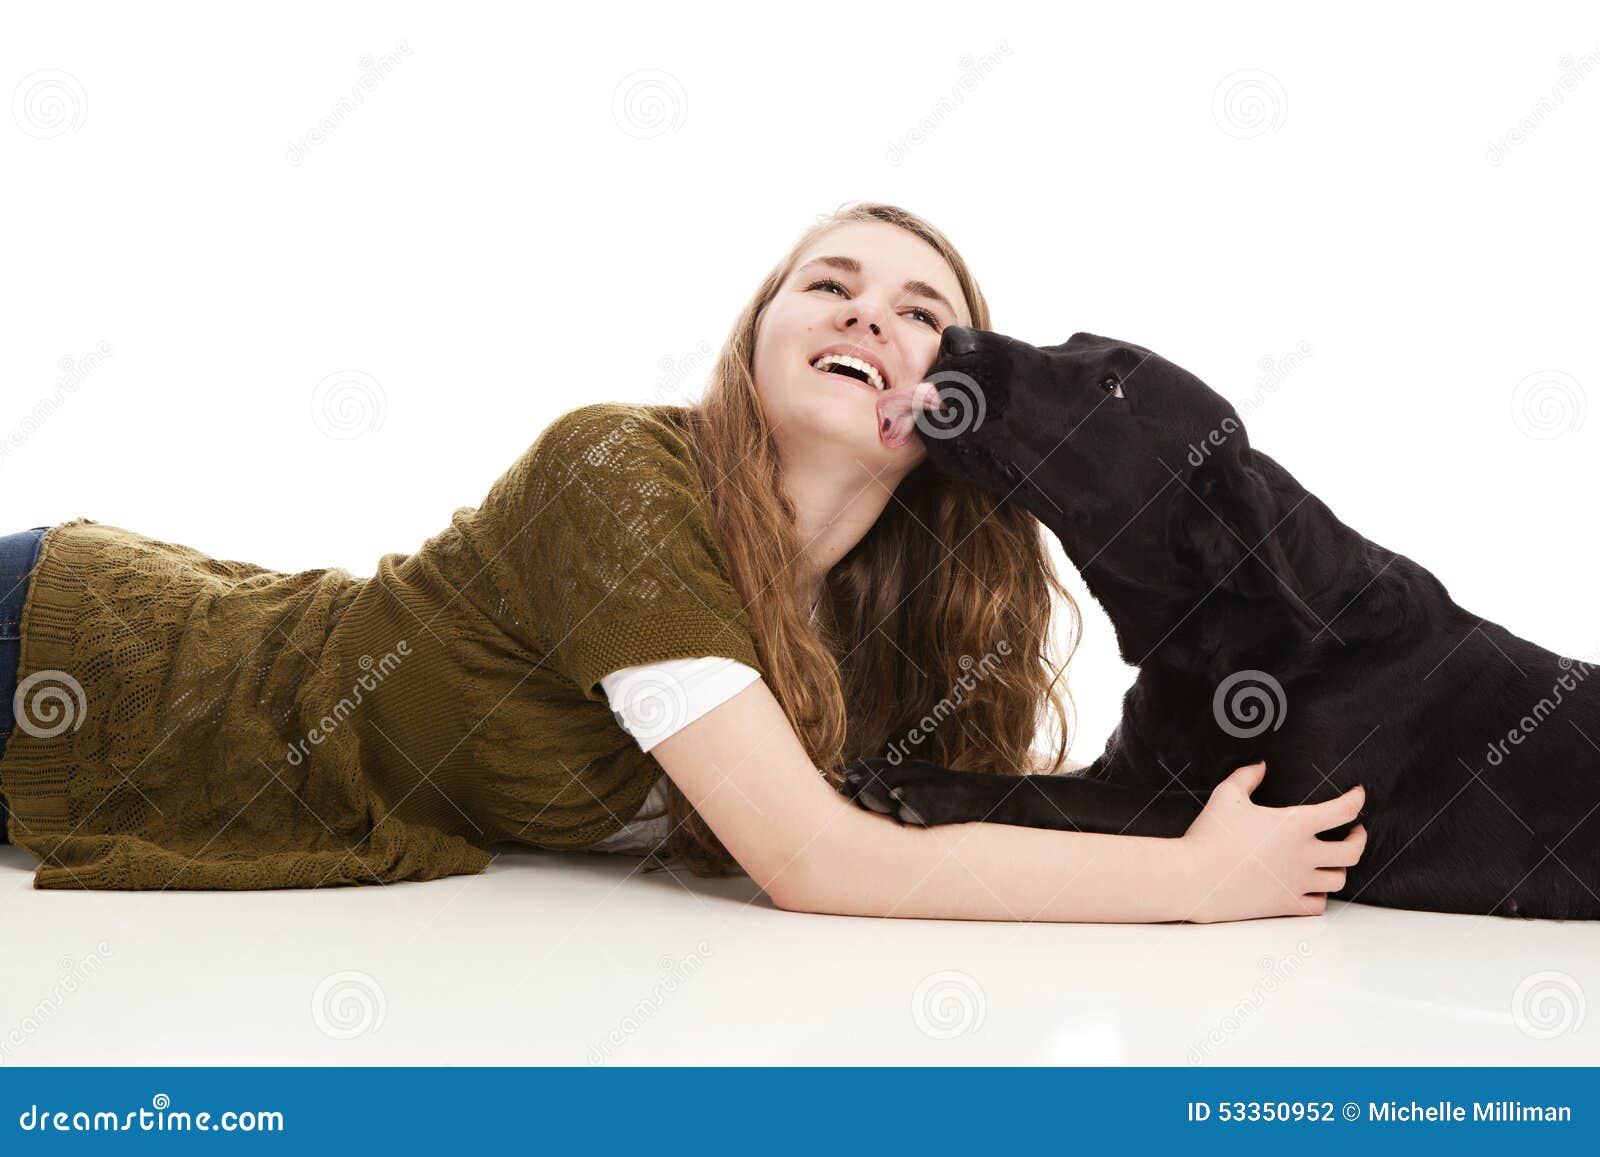 Sloppy Wet Kiss Stock Photo Image Of Love Guide Happy 53350952